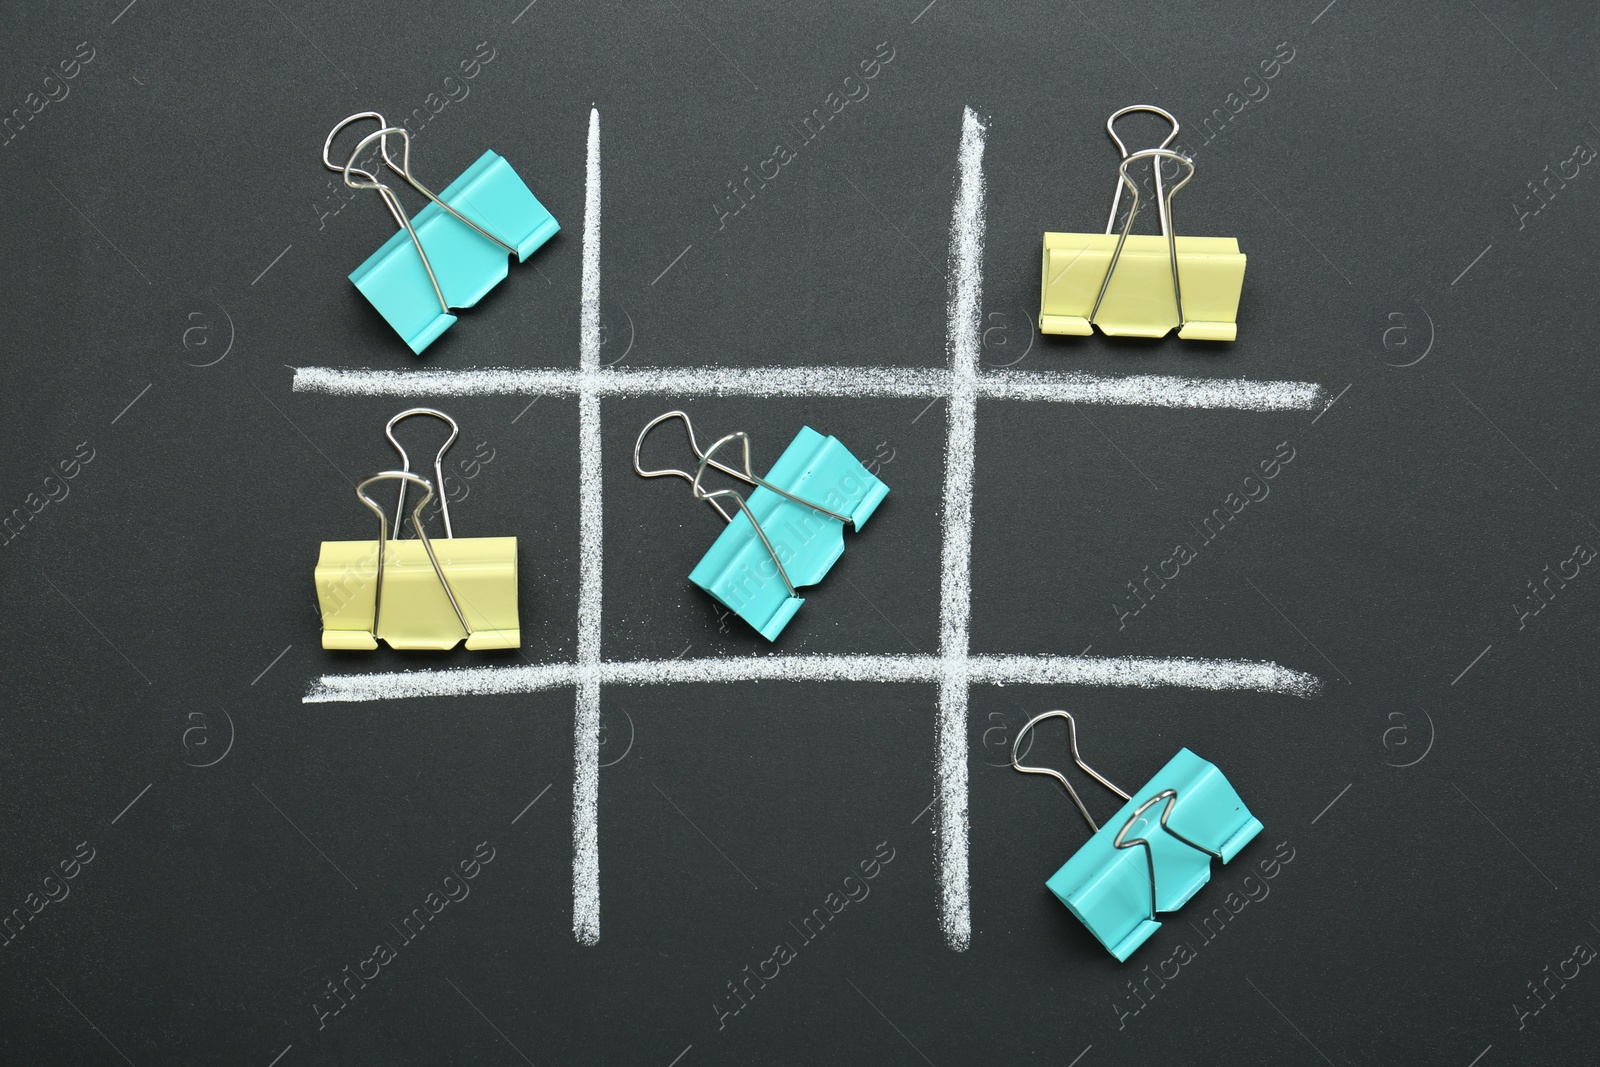 Photo of Tic tac toe game made with paper clips on chalkboard, top view